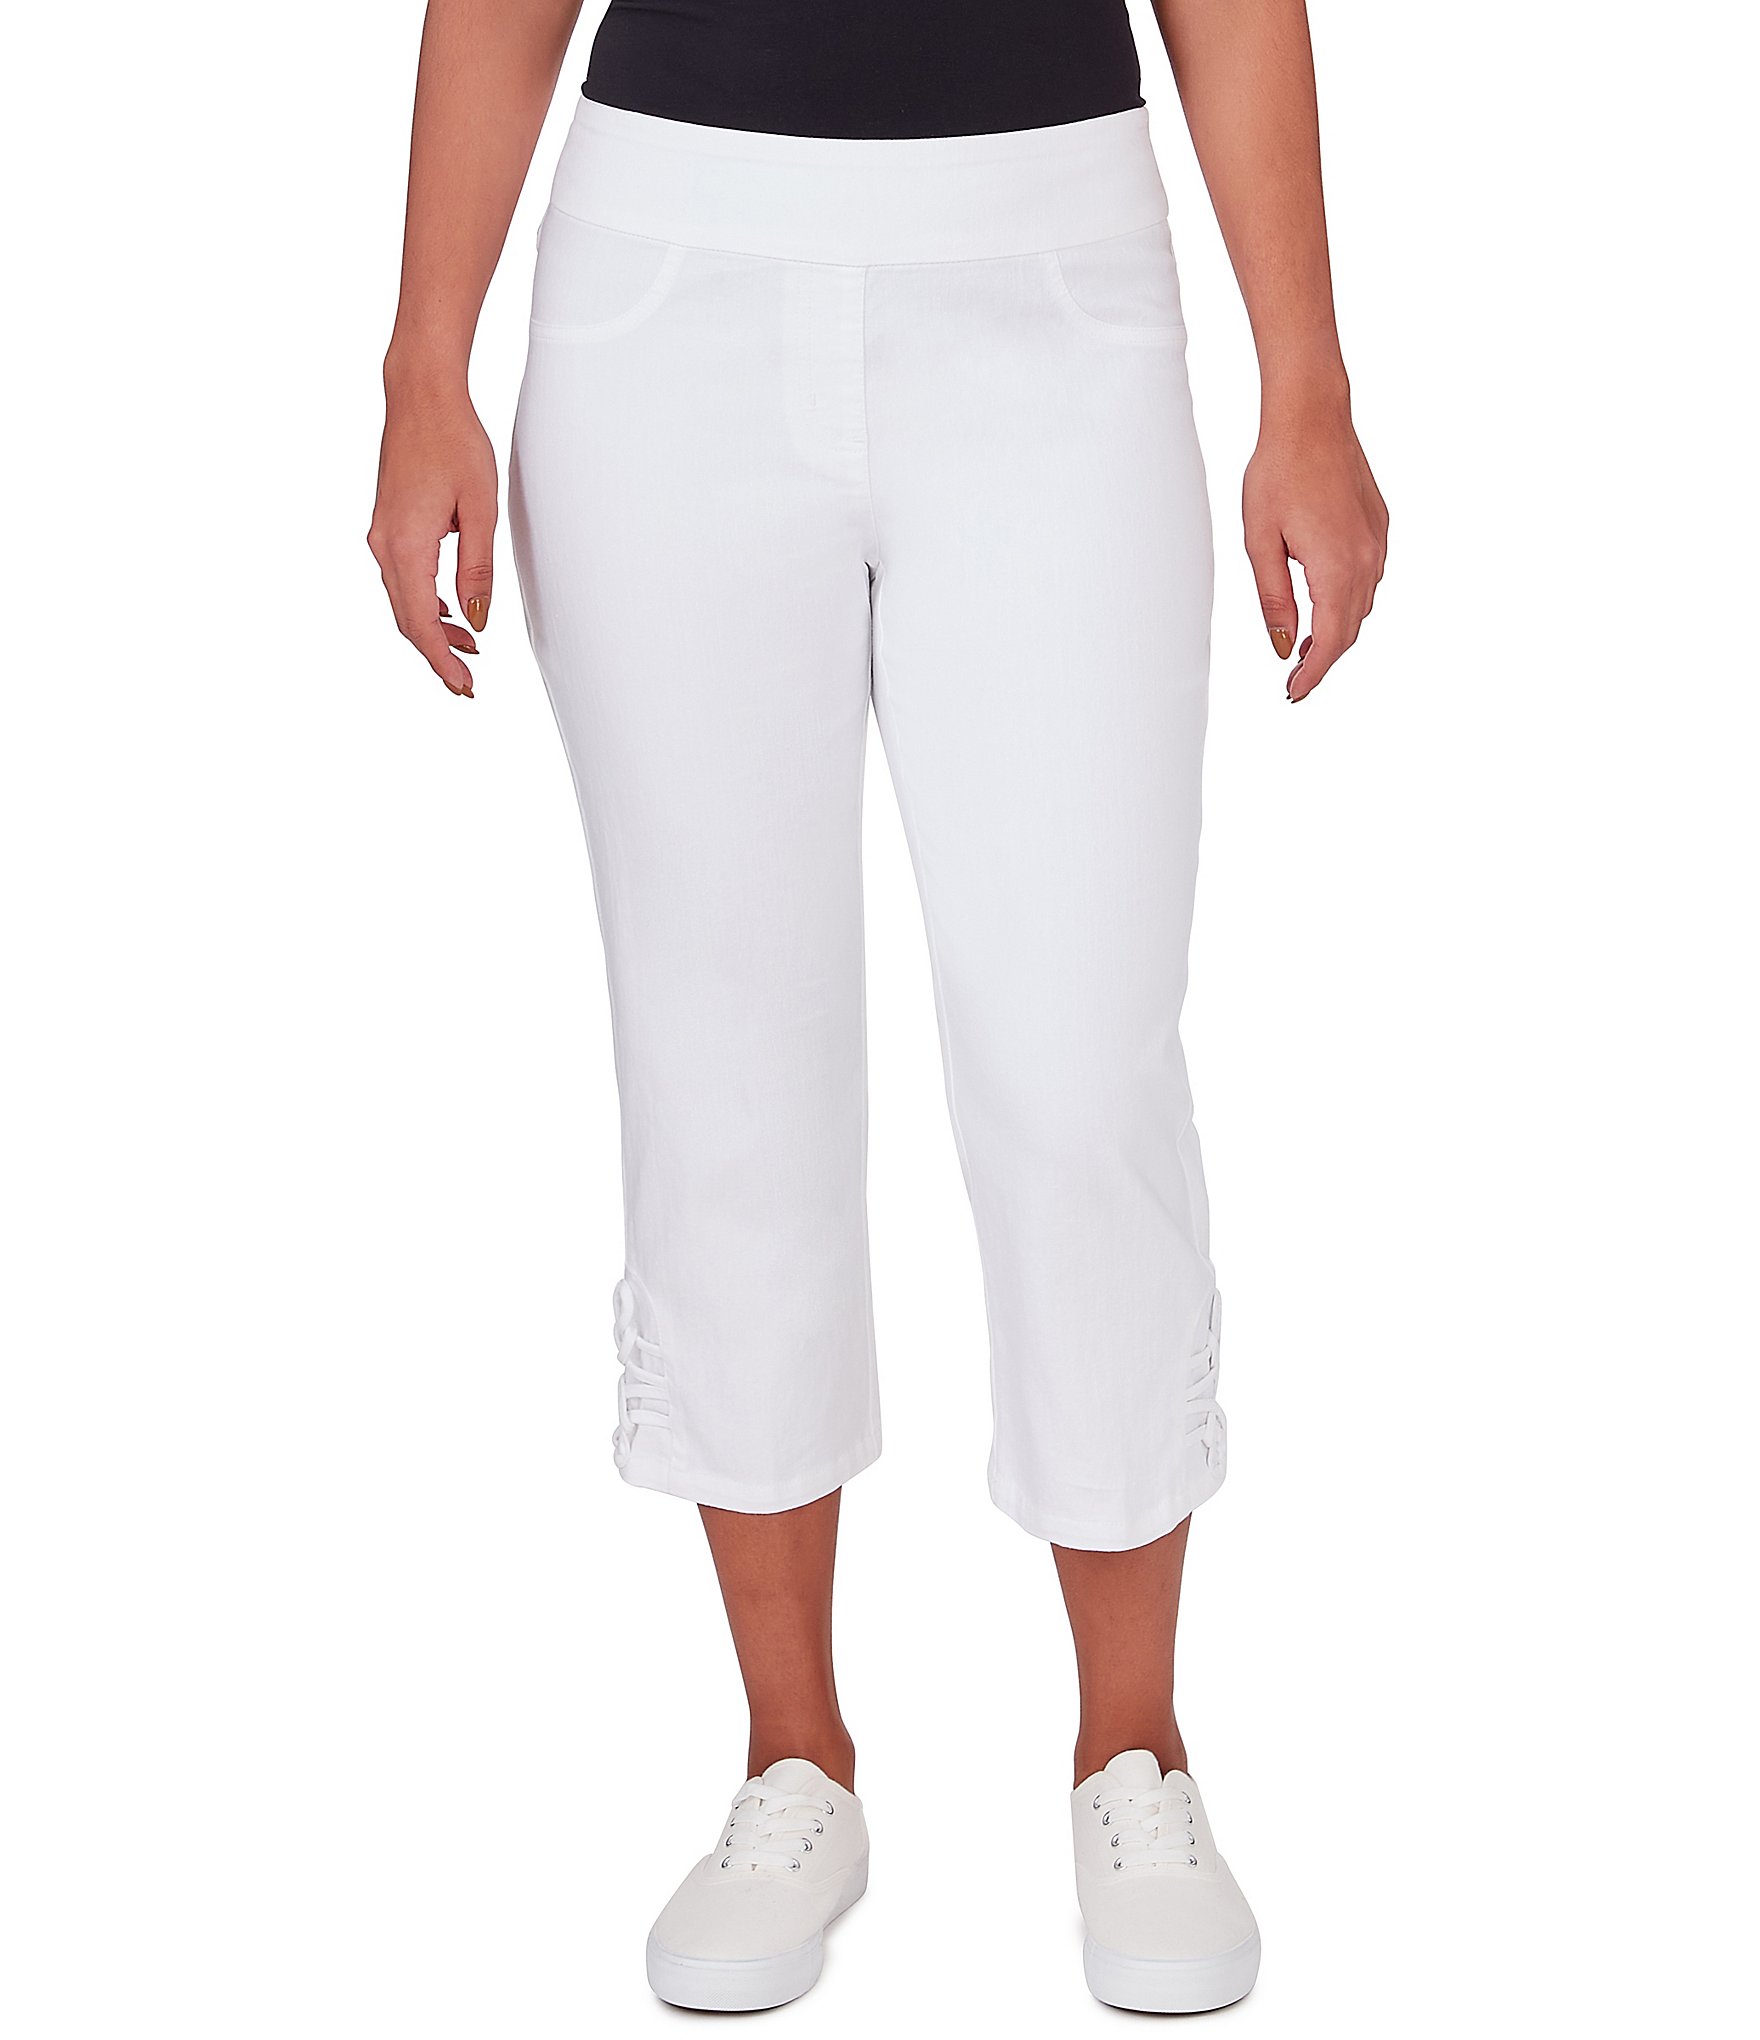 Wicked by Women with Control Petite Capri Pants w/ Pockets & Slits